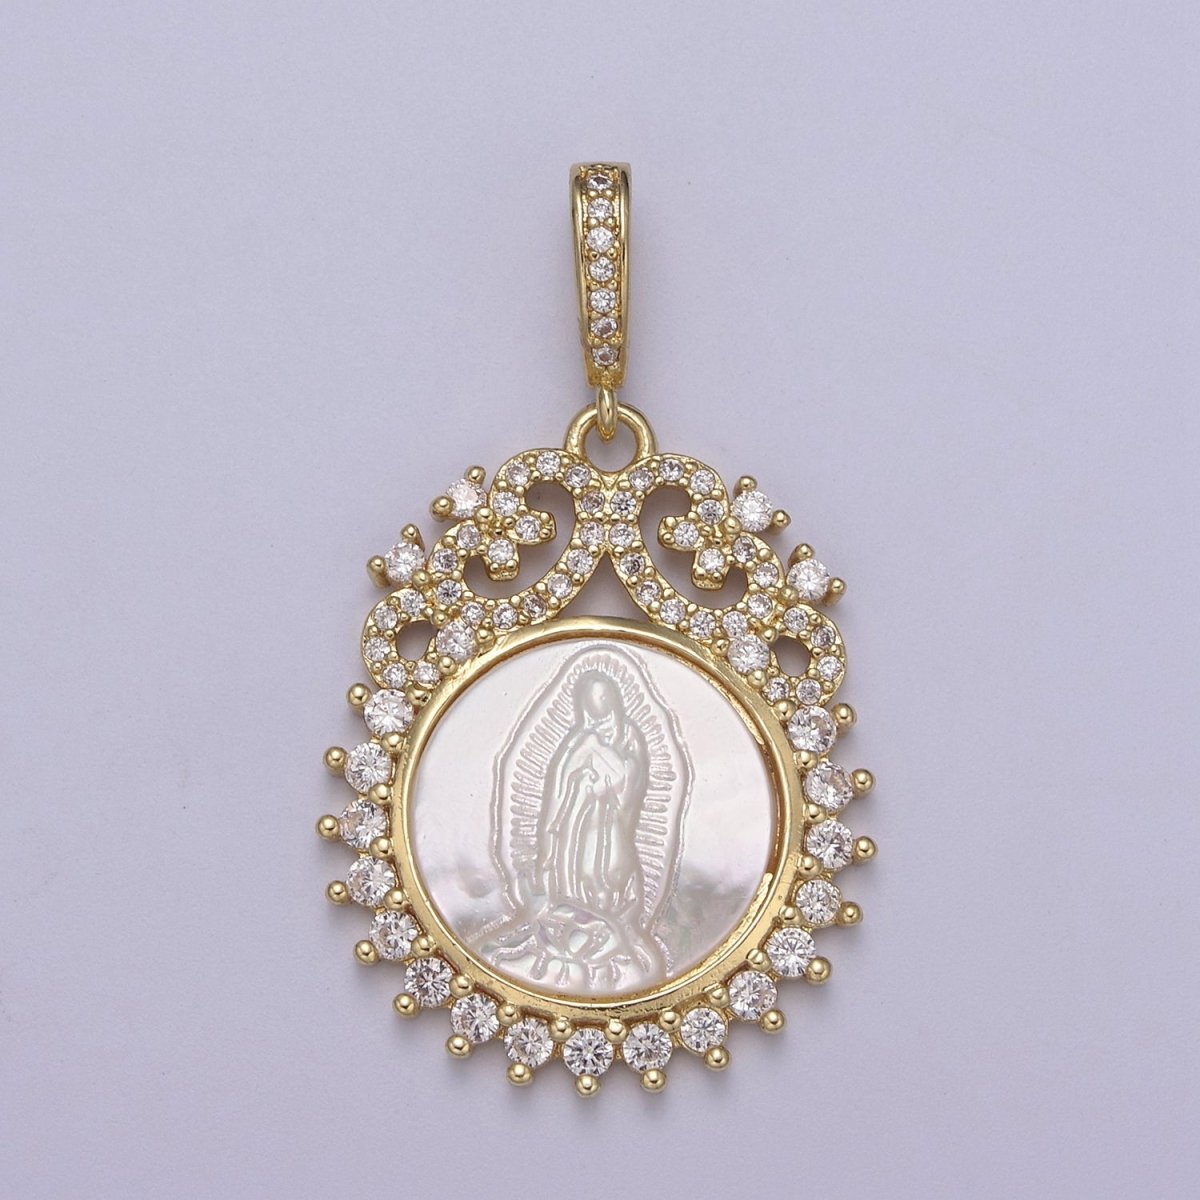 14k Gold filled Virgen de Guadalupe necklace Pendant Micro Pave religious jewelry Pearl Virgin Mary jewelry, Our lady of Guadalupe pendant H-516 - DLUXCA